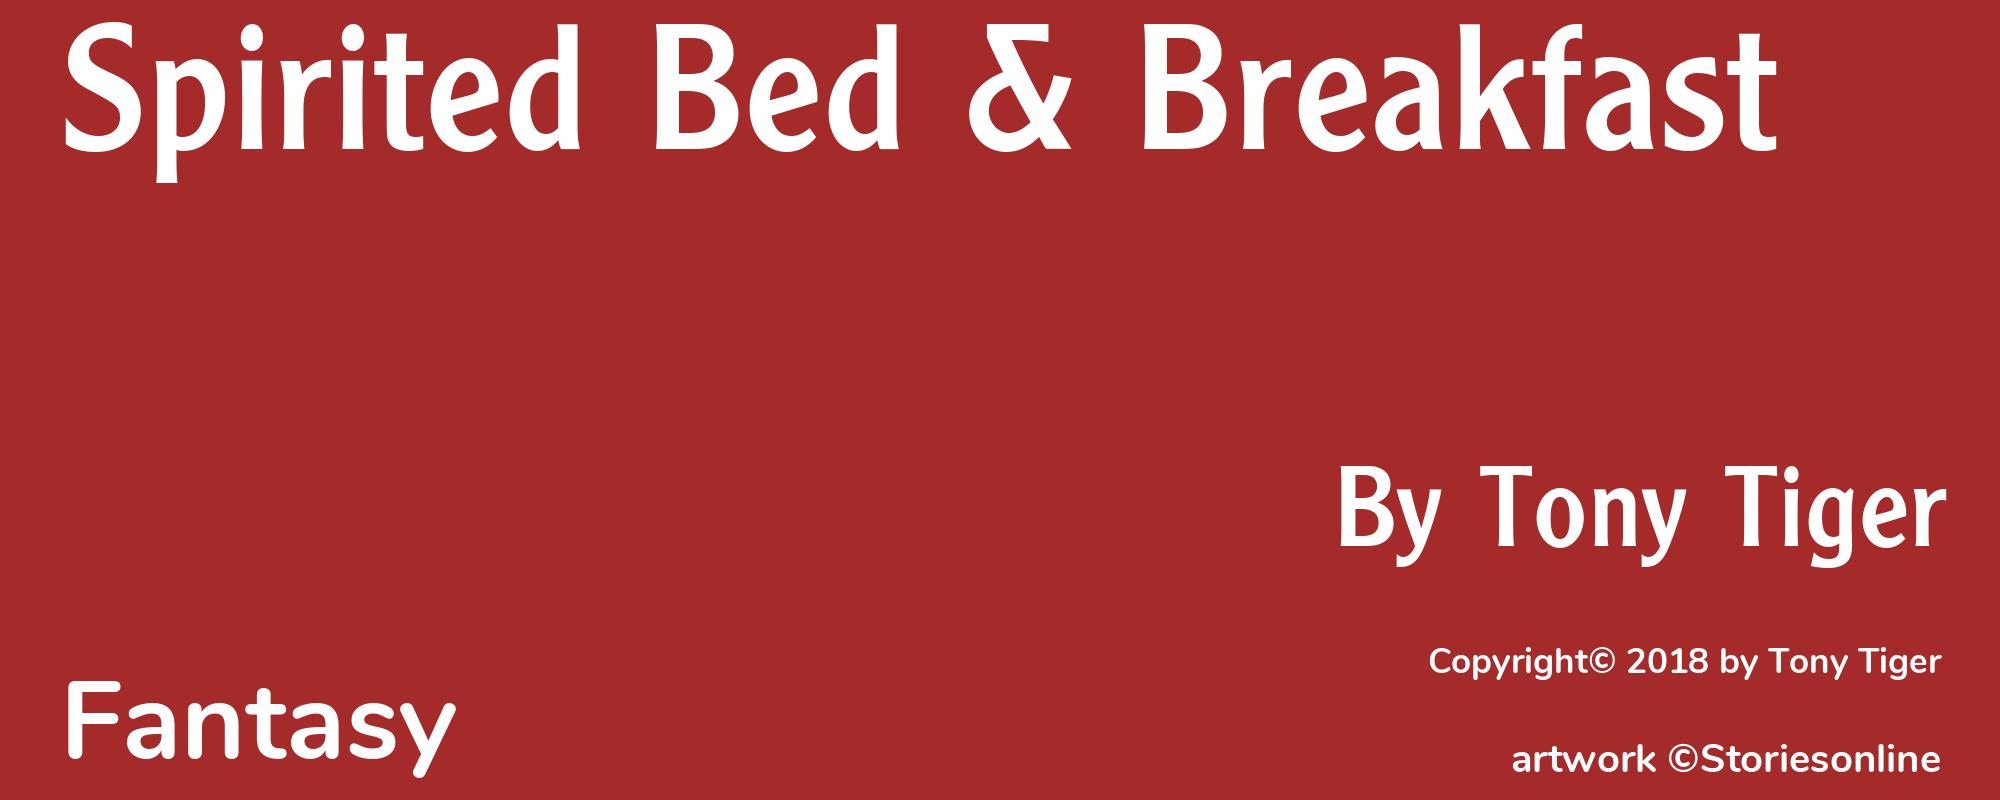 Spirited Bed & Breakfast - Cover